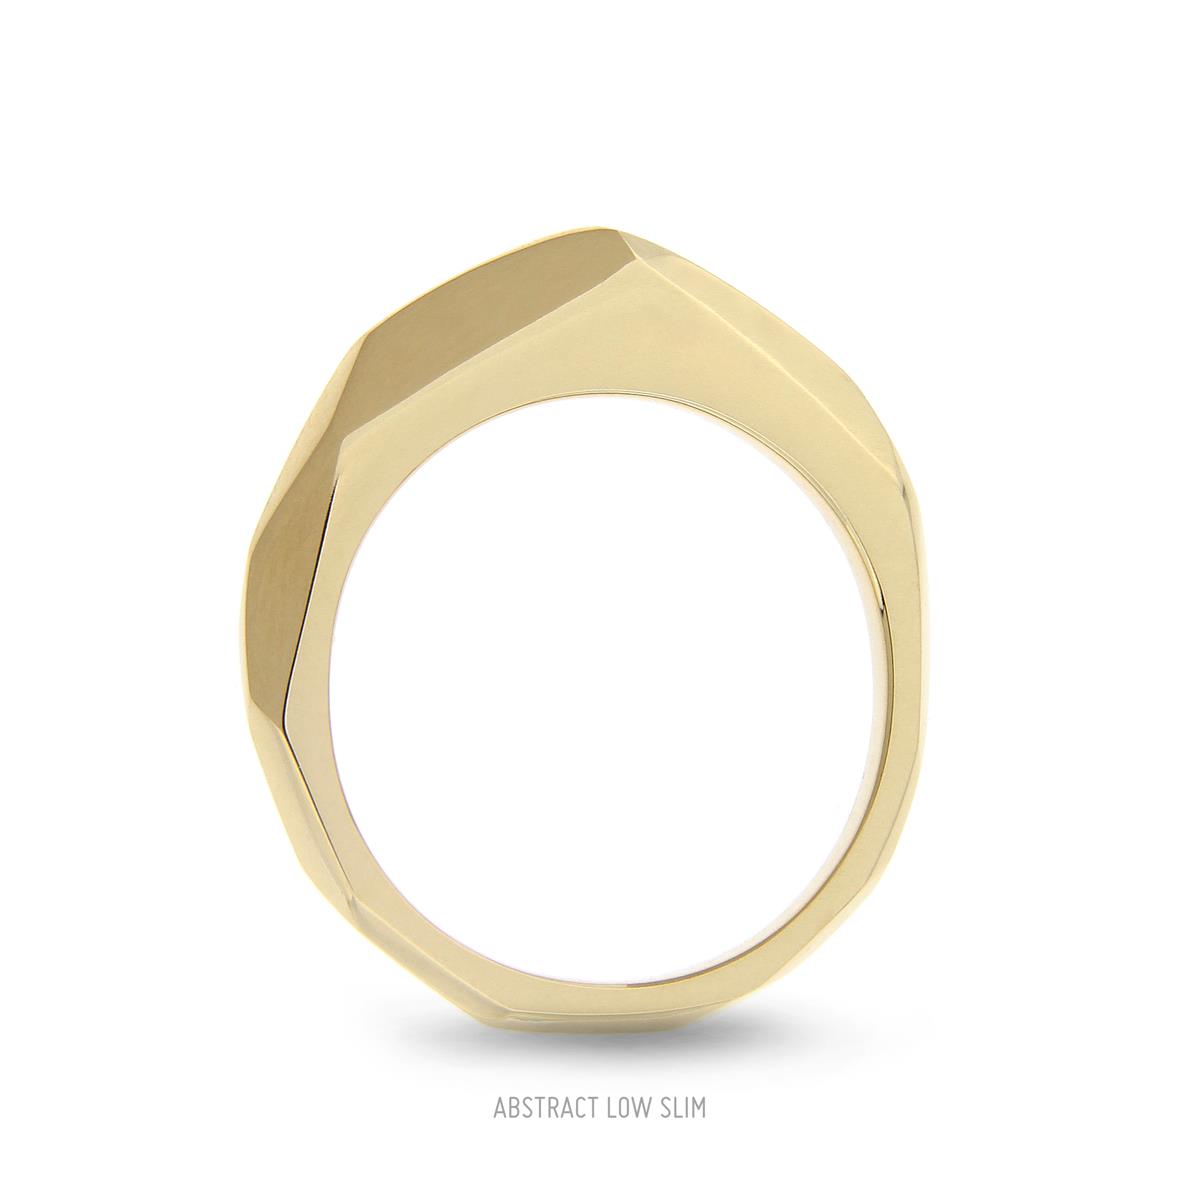 Katie g. Jewellery - Abstract Low Slim - Champagnergold